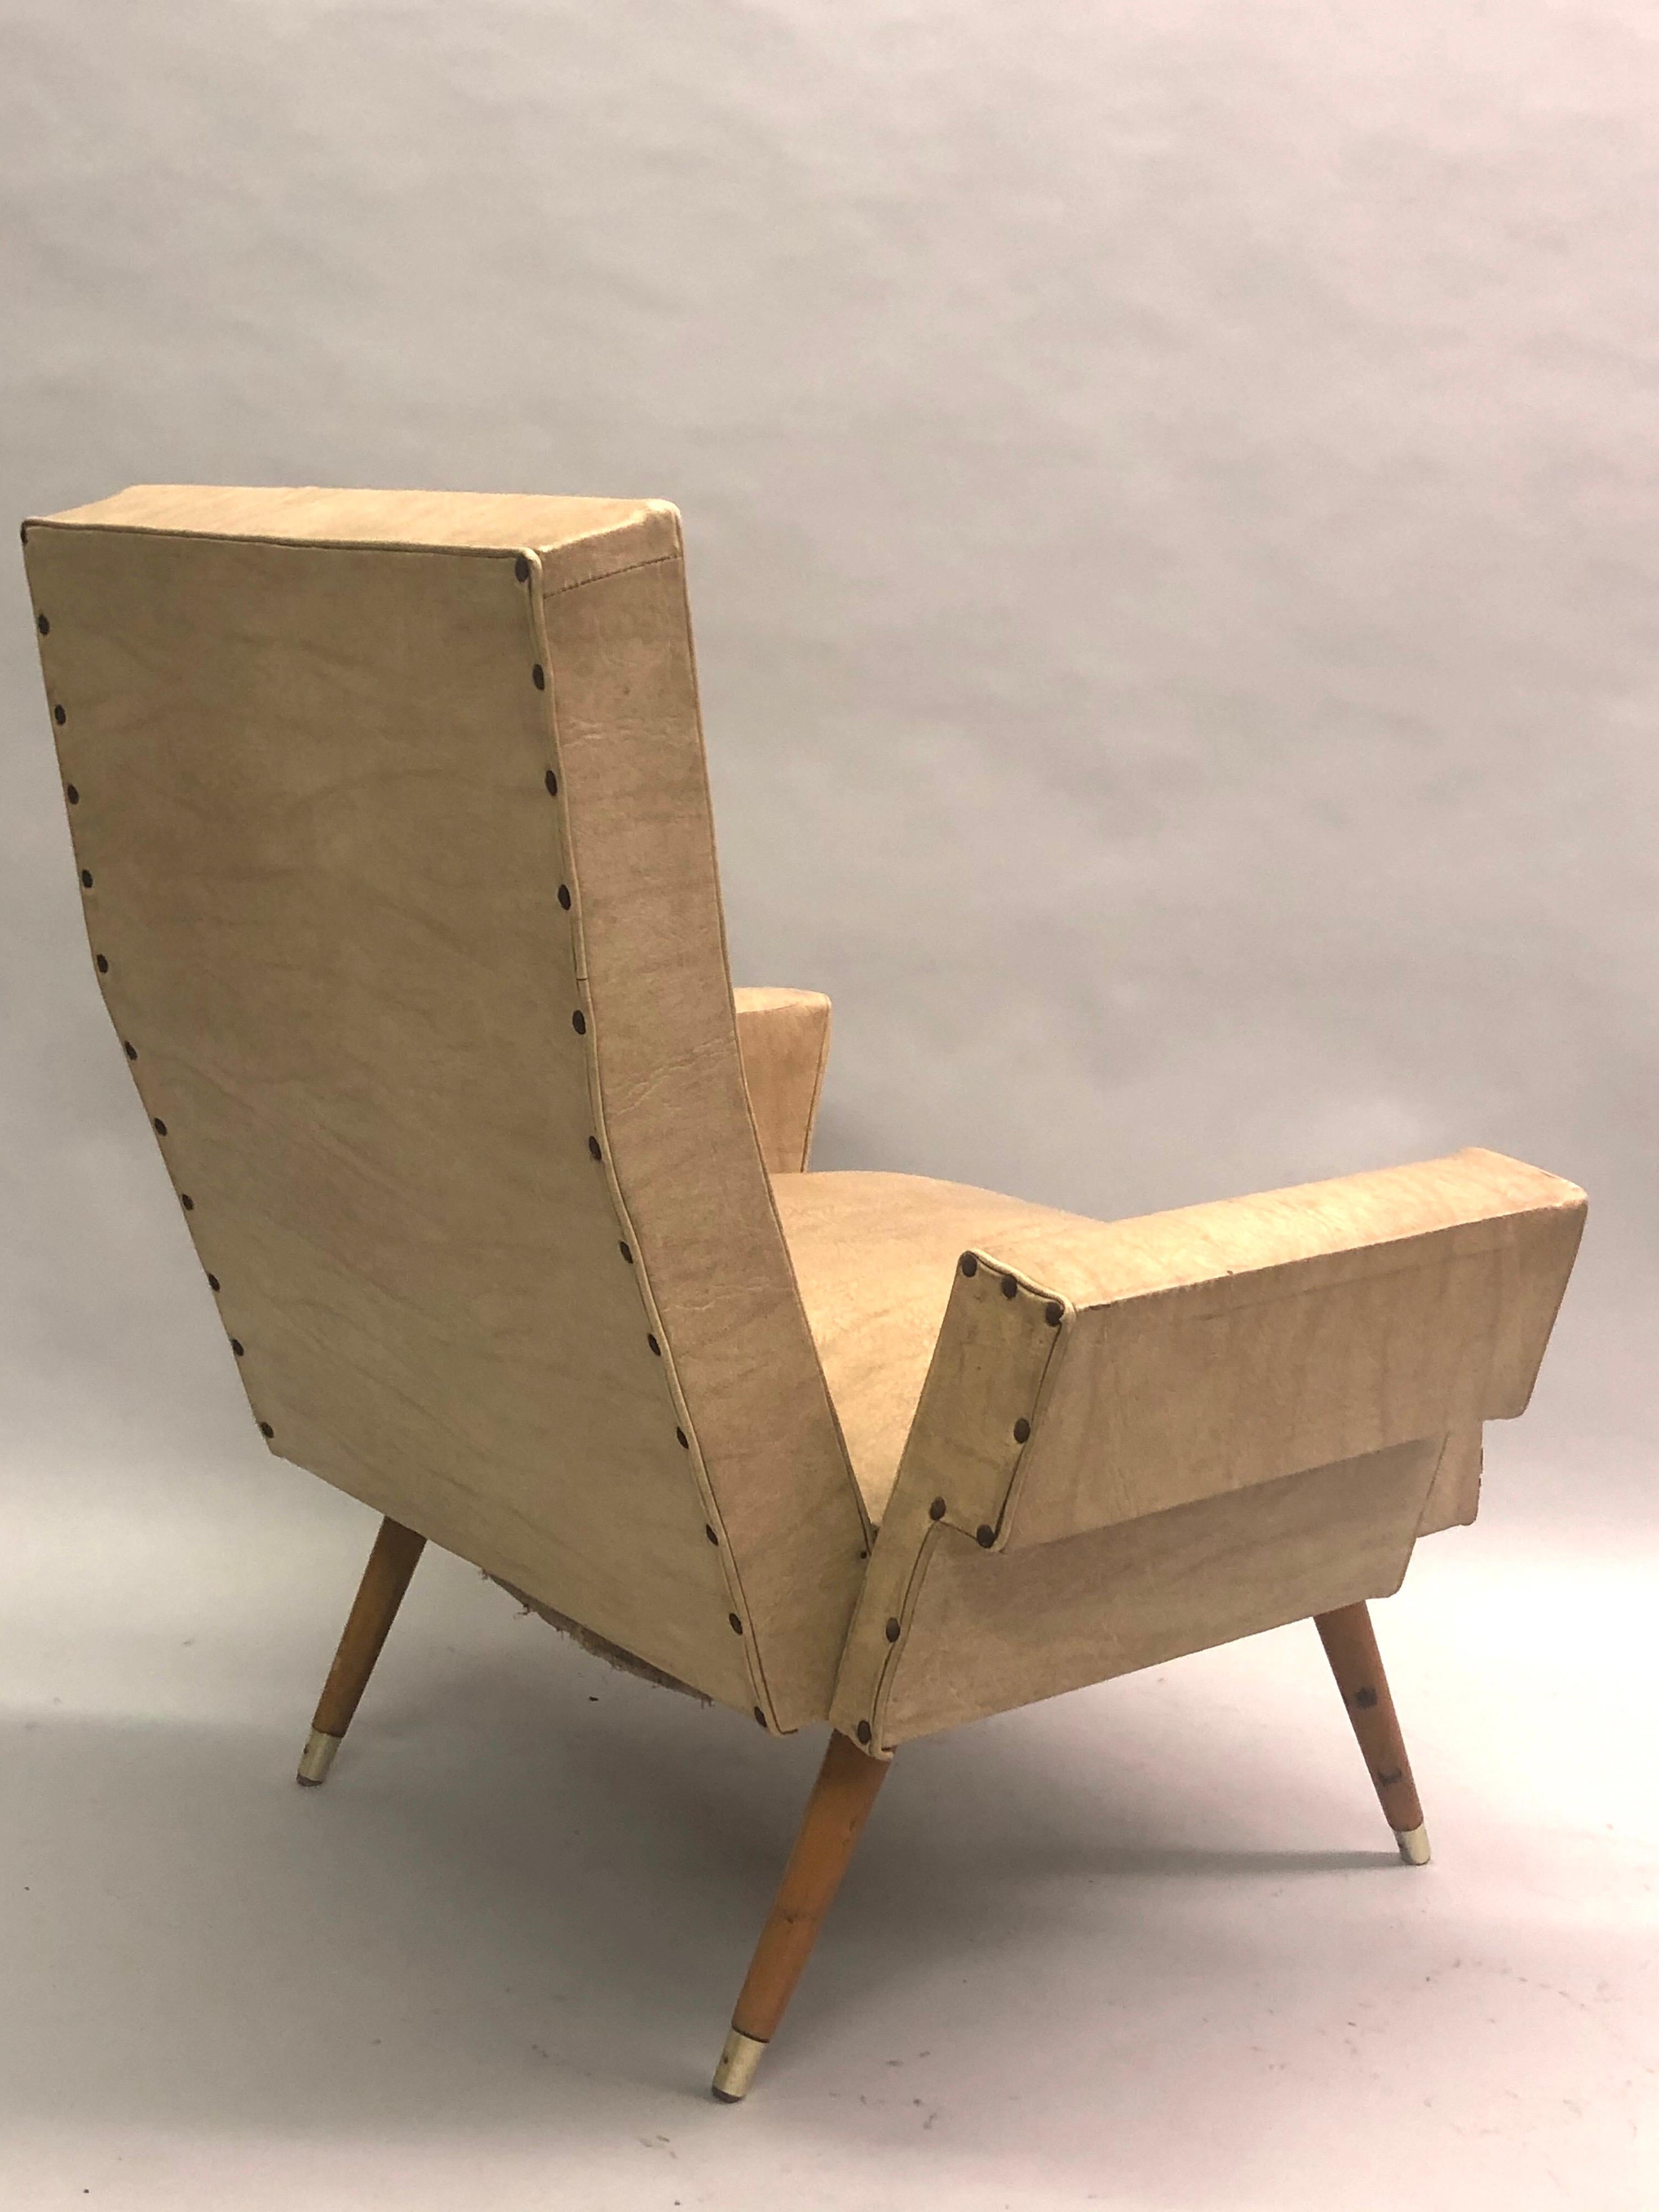 Rare Pair of Italian Futurist / Mid-Century Modern Lounge Chairs, Giacomo Balla In Fair Condition For Sale In New York, NY